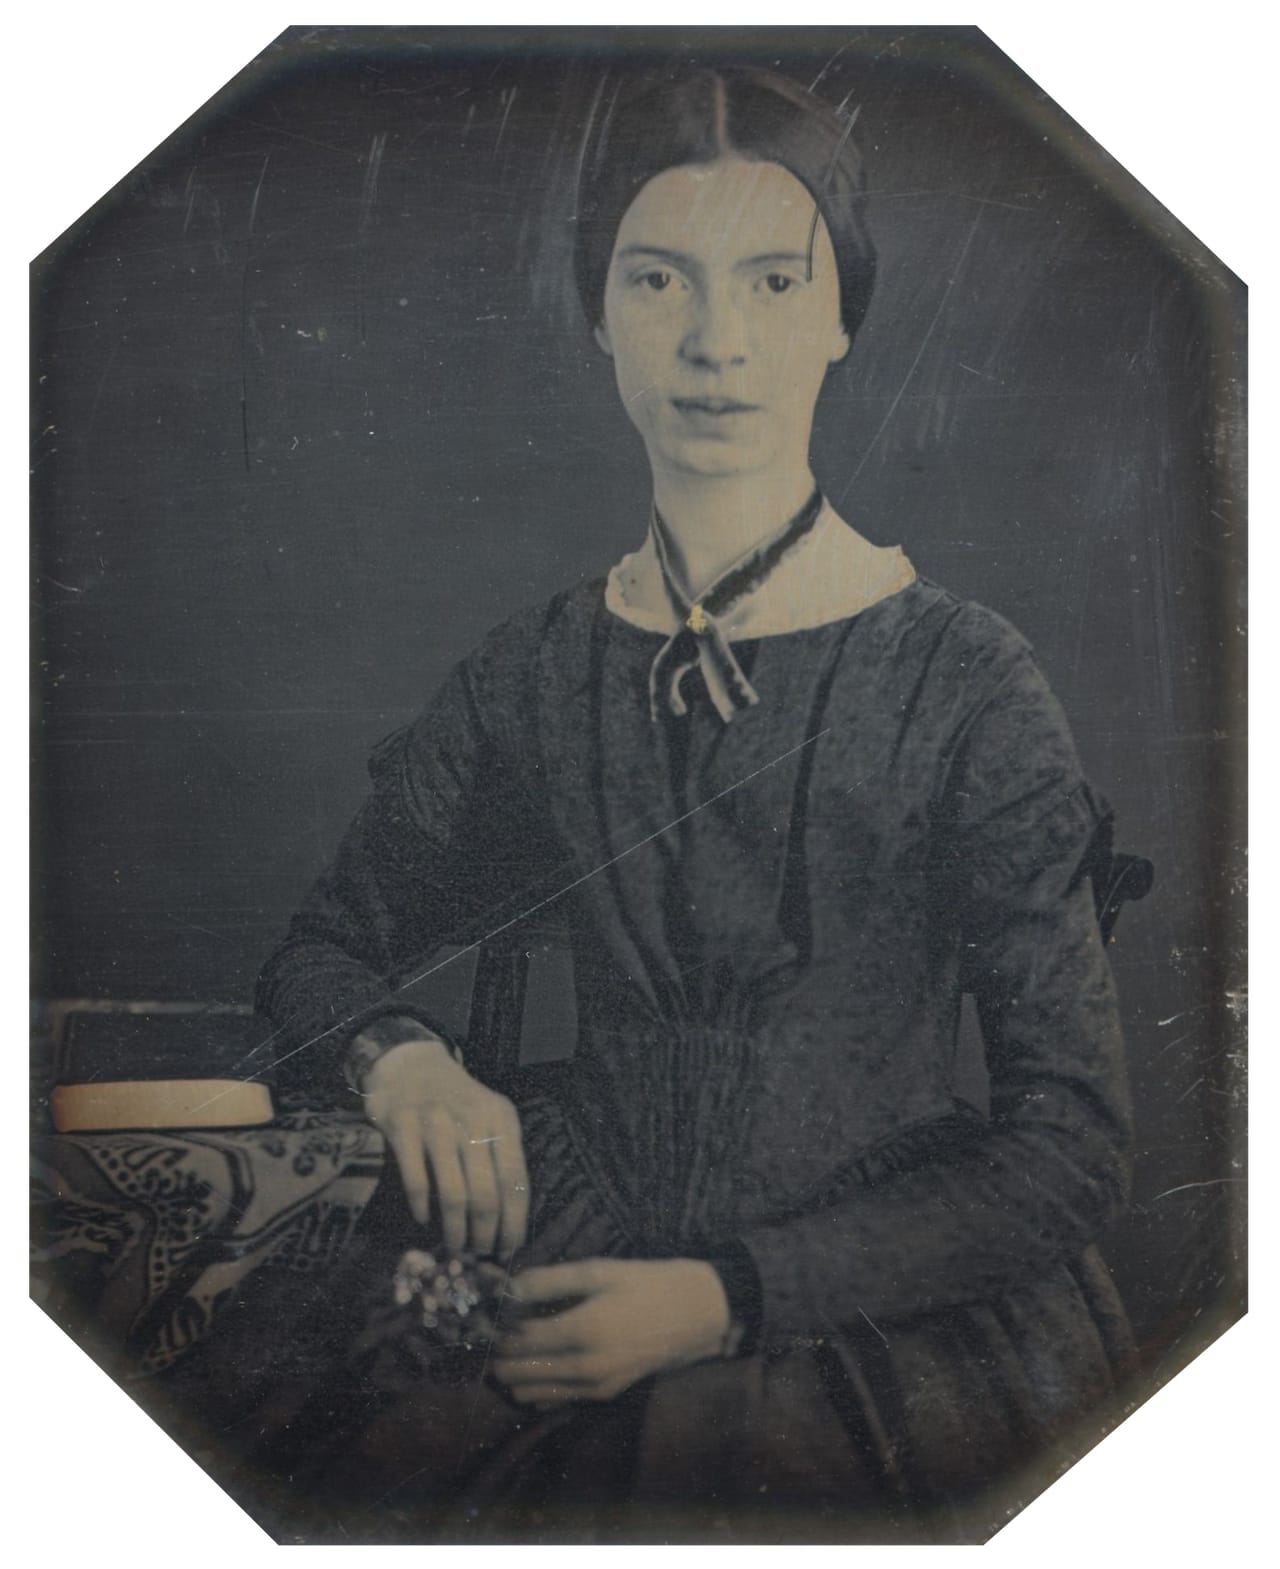 Nièpce Black White Photograph Of Emily Dickinson2